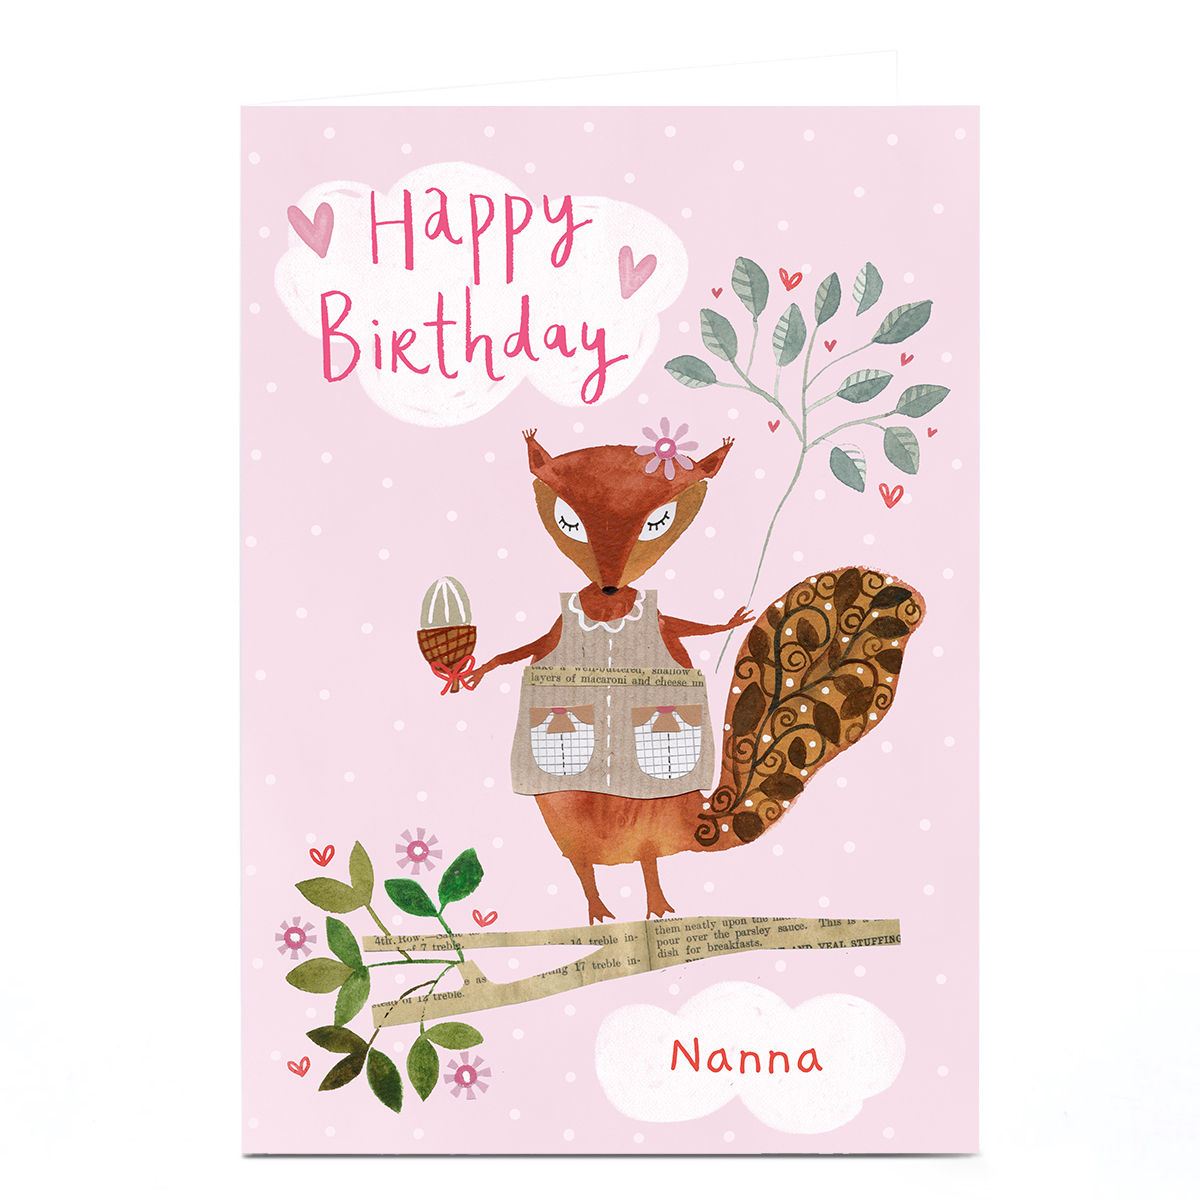 Personalised Lindsay Loves To Draw Birthday Card - Squirrel